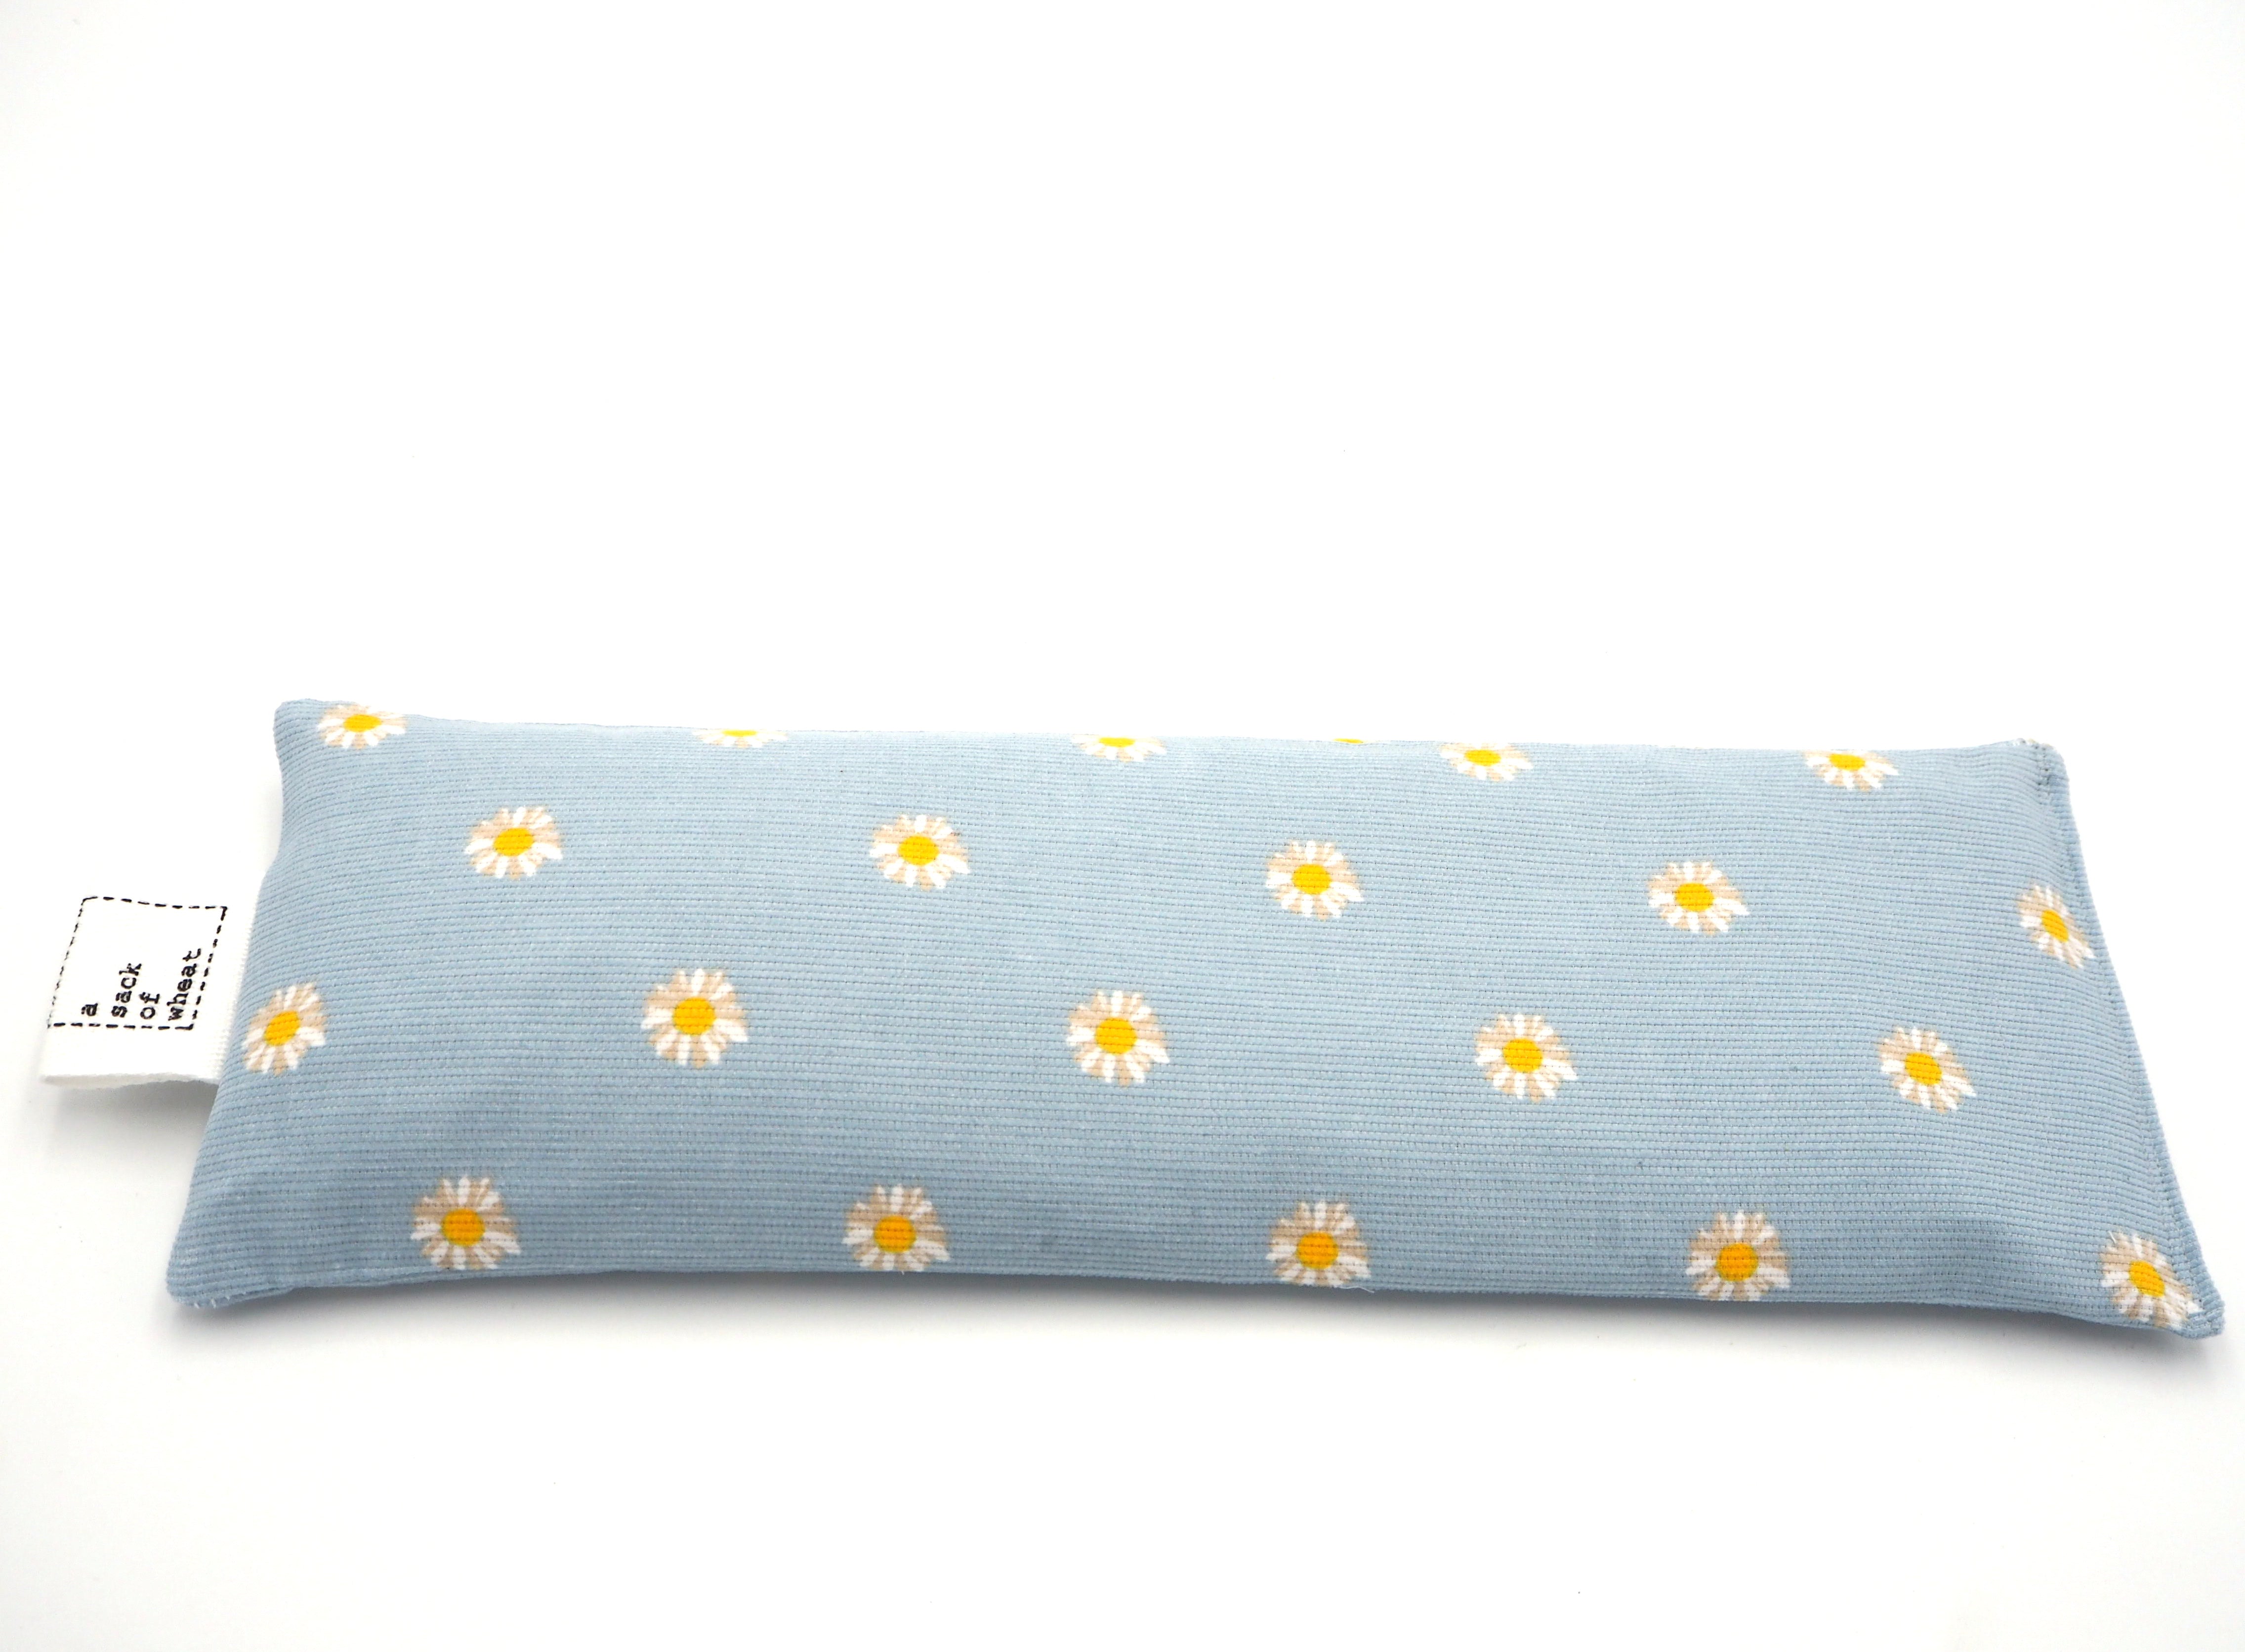 Flat view of A Sack Of Wheat, featuring soft yellow, spring daisy's on baby blue corduroy 100% cotton fabric